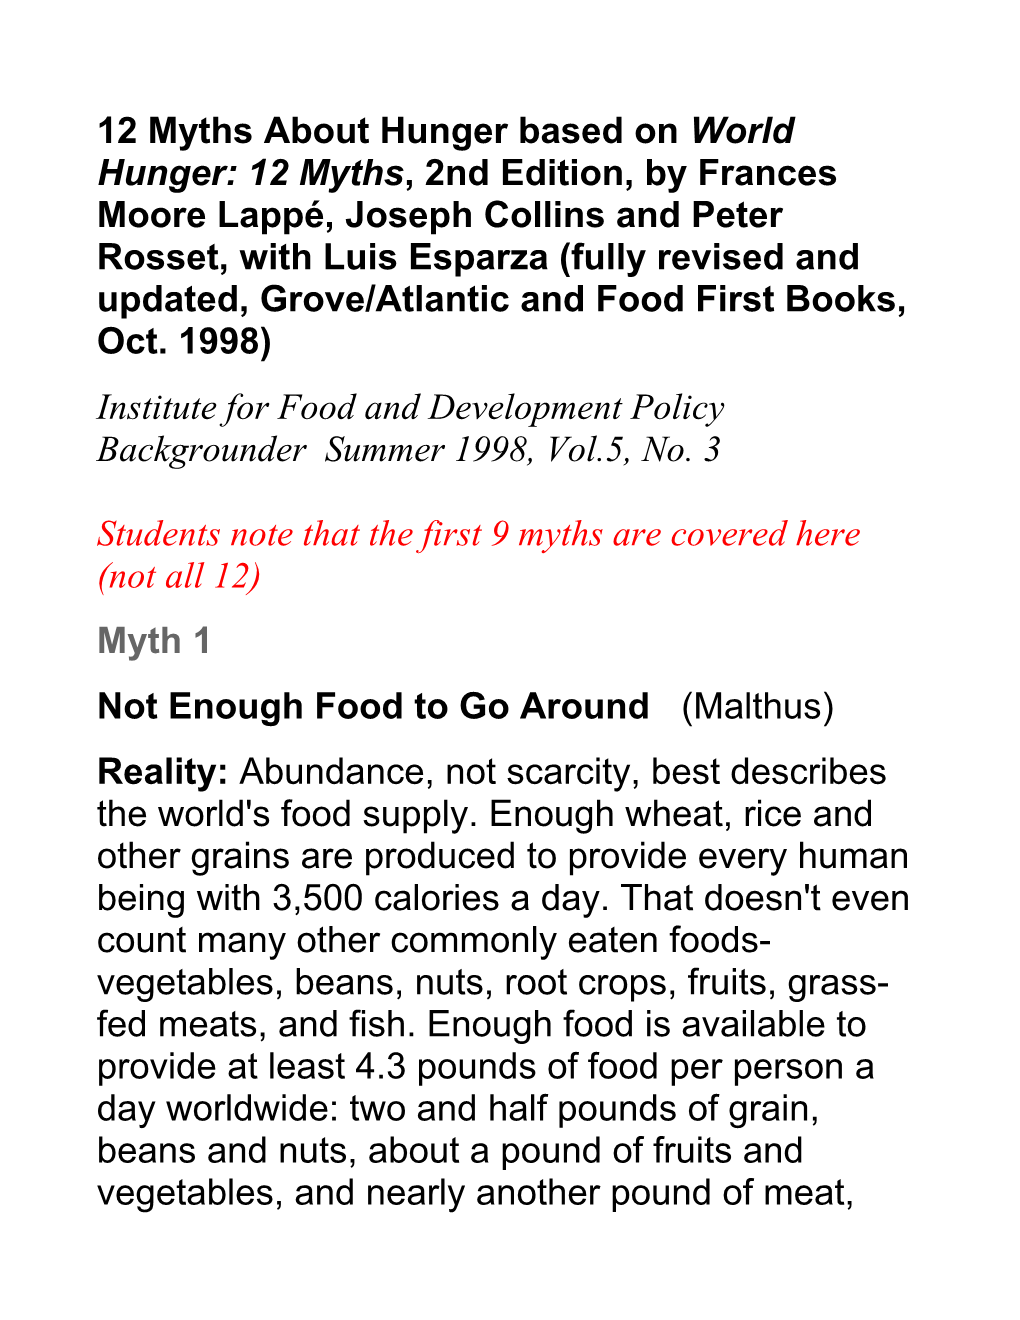 12 Myths About World Hunger